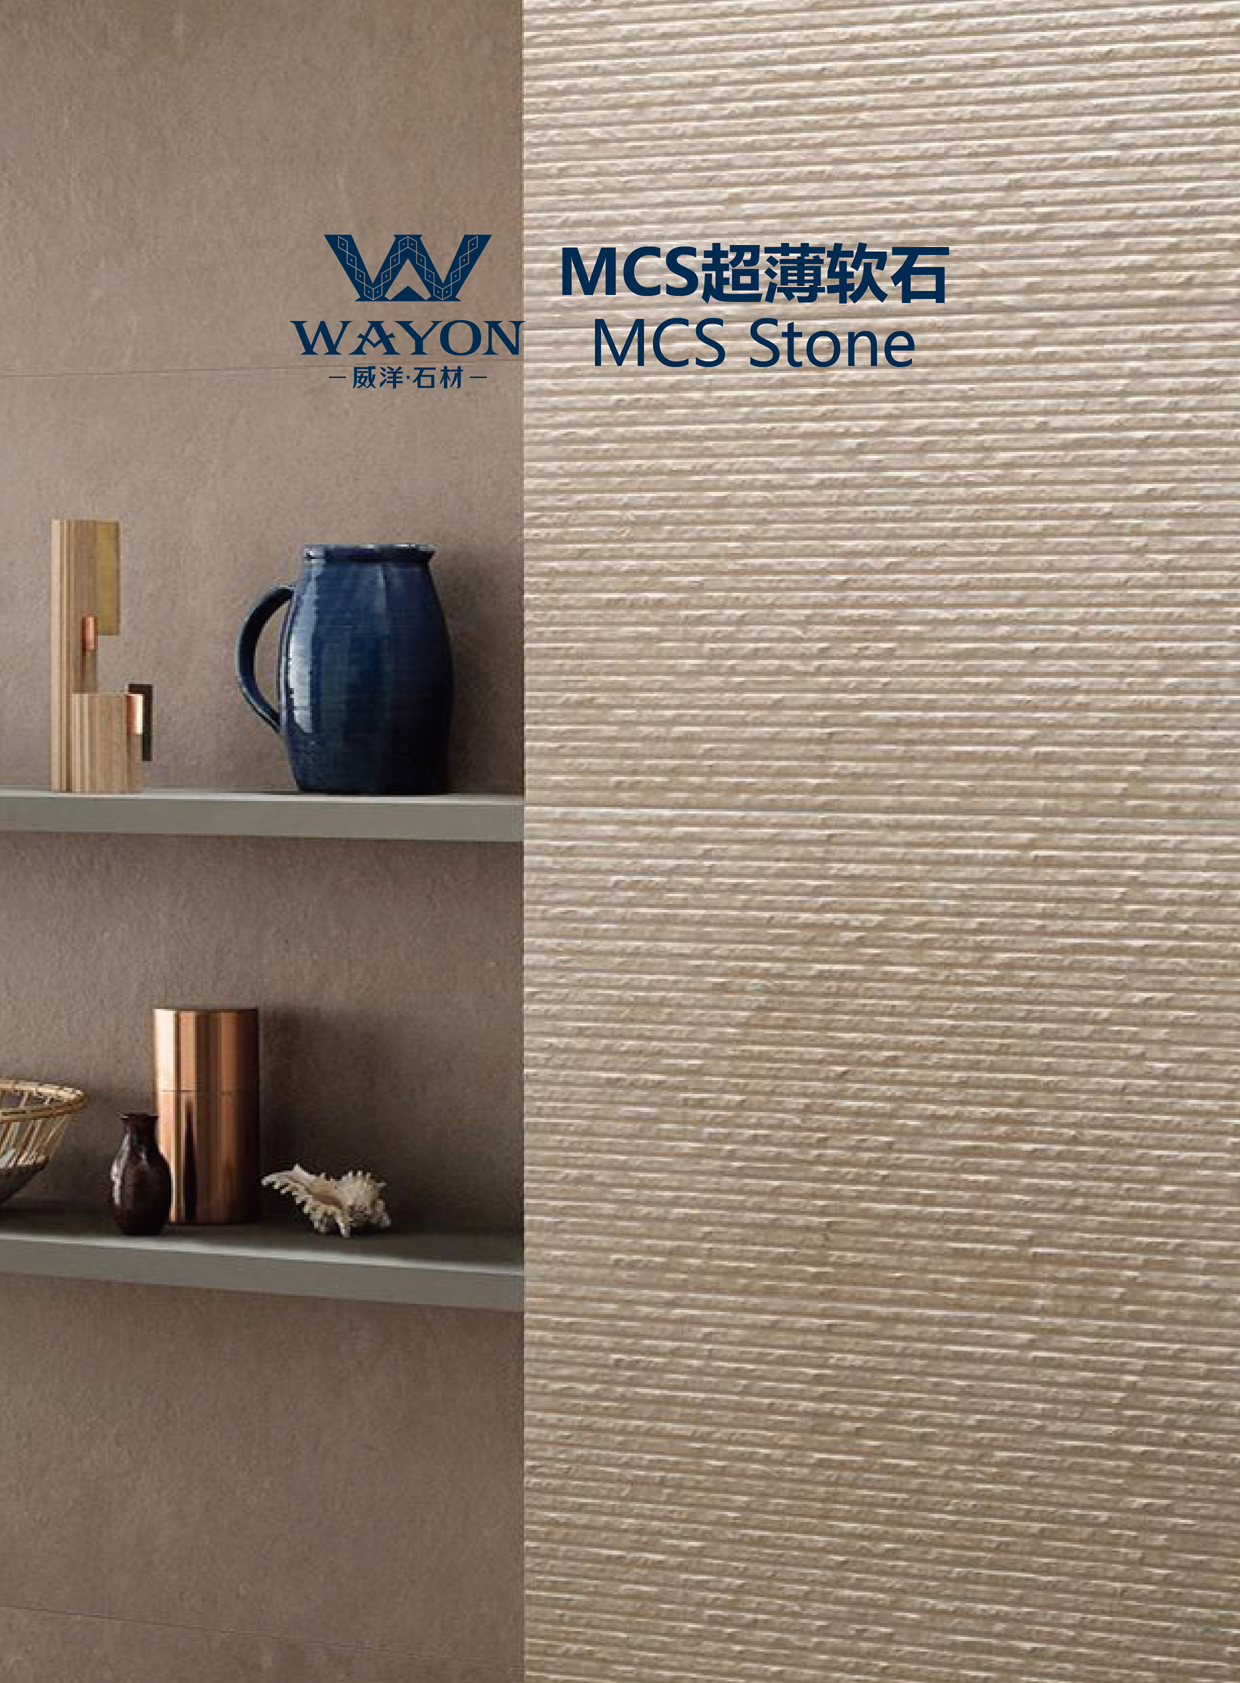 Wayon MCS Stone | Have you ever seen a stone that is as soft and versatile as paper